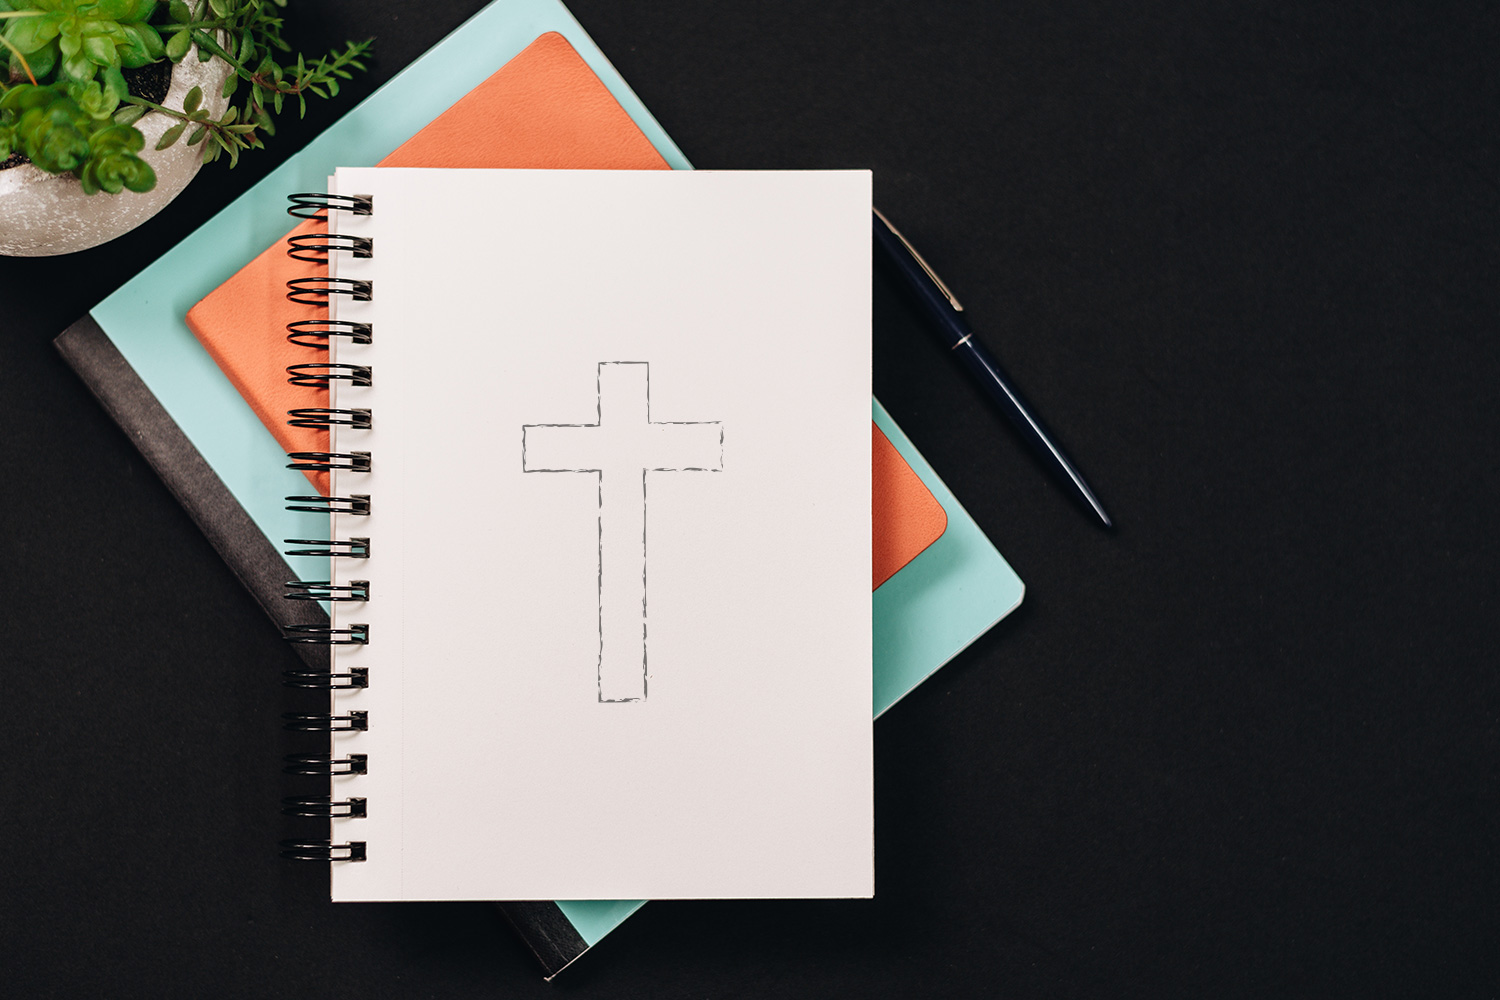 The Christian Cross: Symbolism and Modern Graphic Design